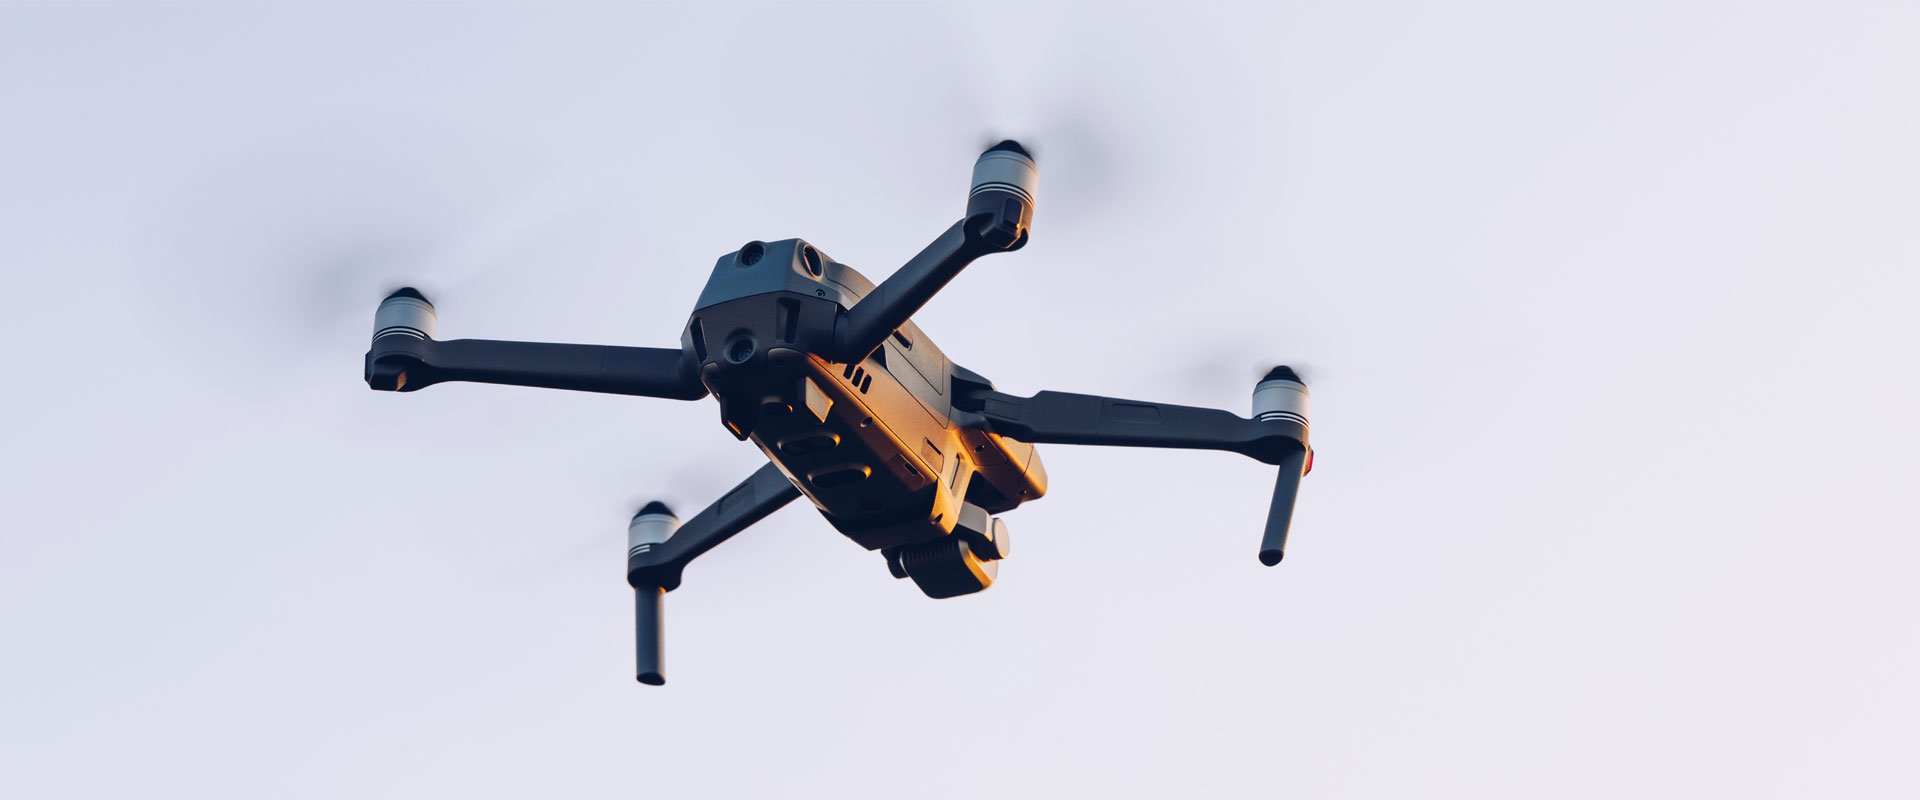 The Changing Face of Unmanned Aerial Vehicles